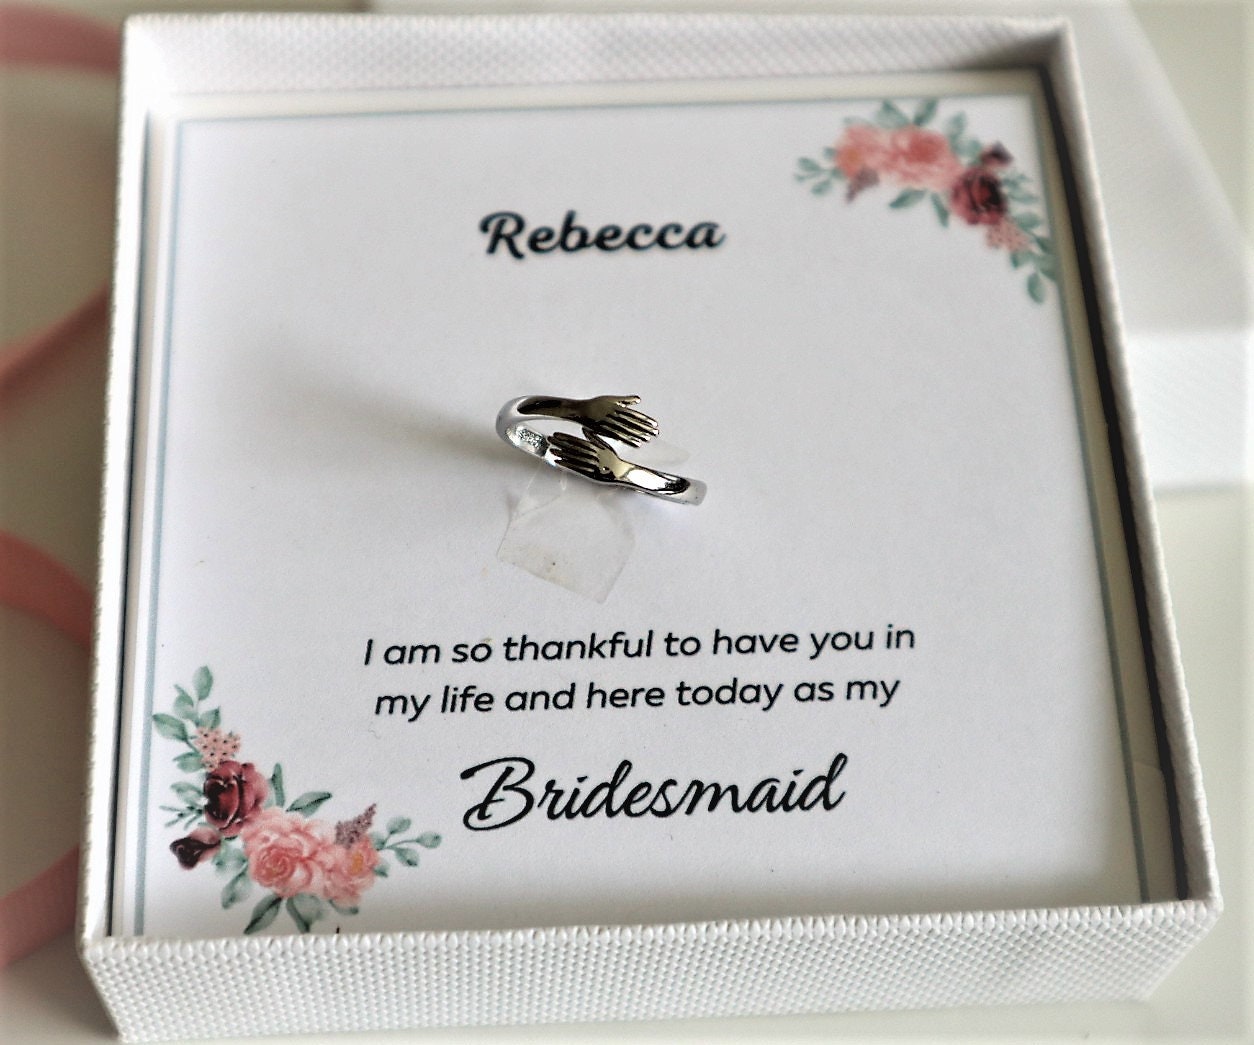 Bridesmaid Proposal Gift ,Personalized gift for Bridesmaid,Maid of honor gift, Wedding Favor for Bridesmaid